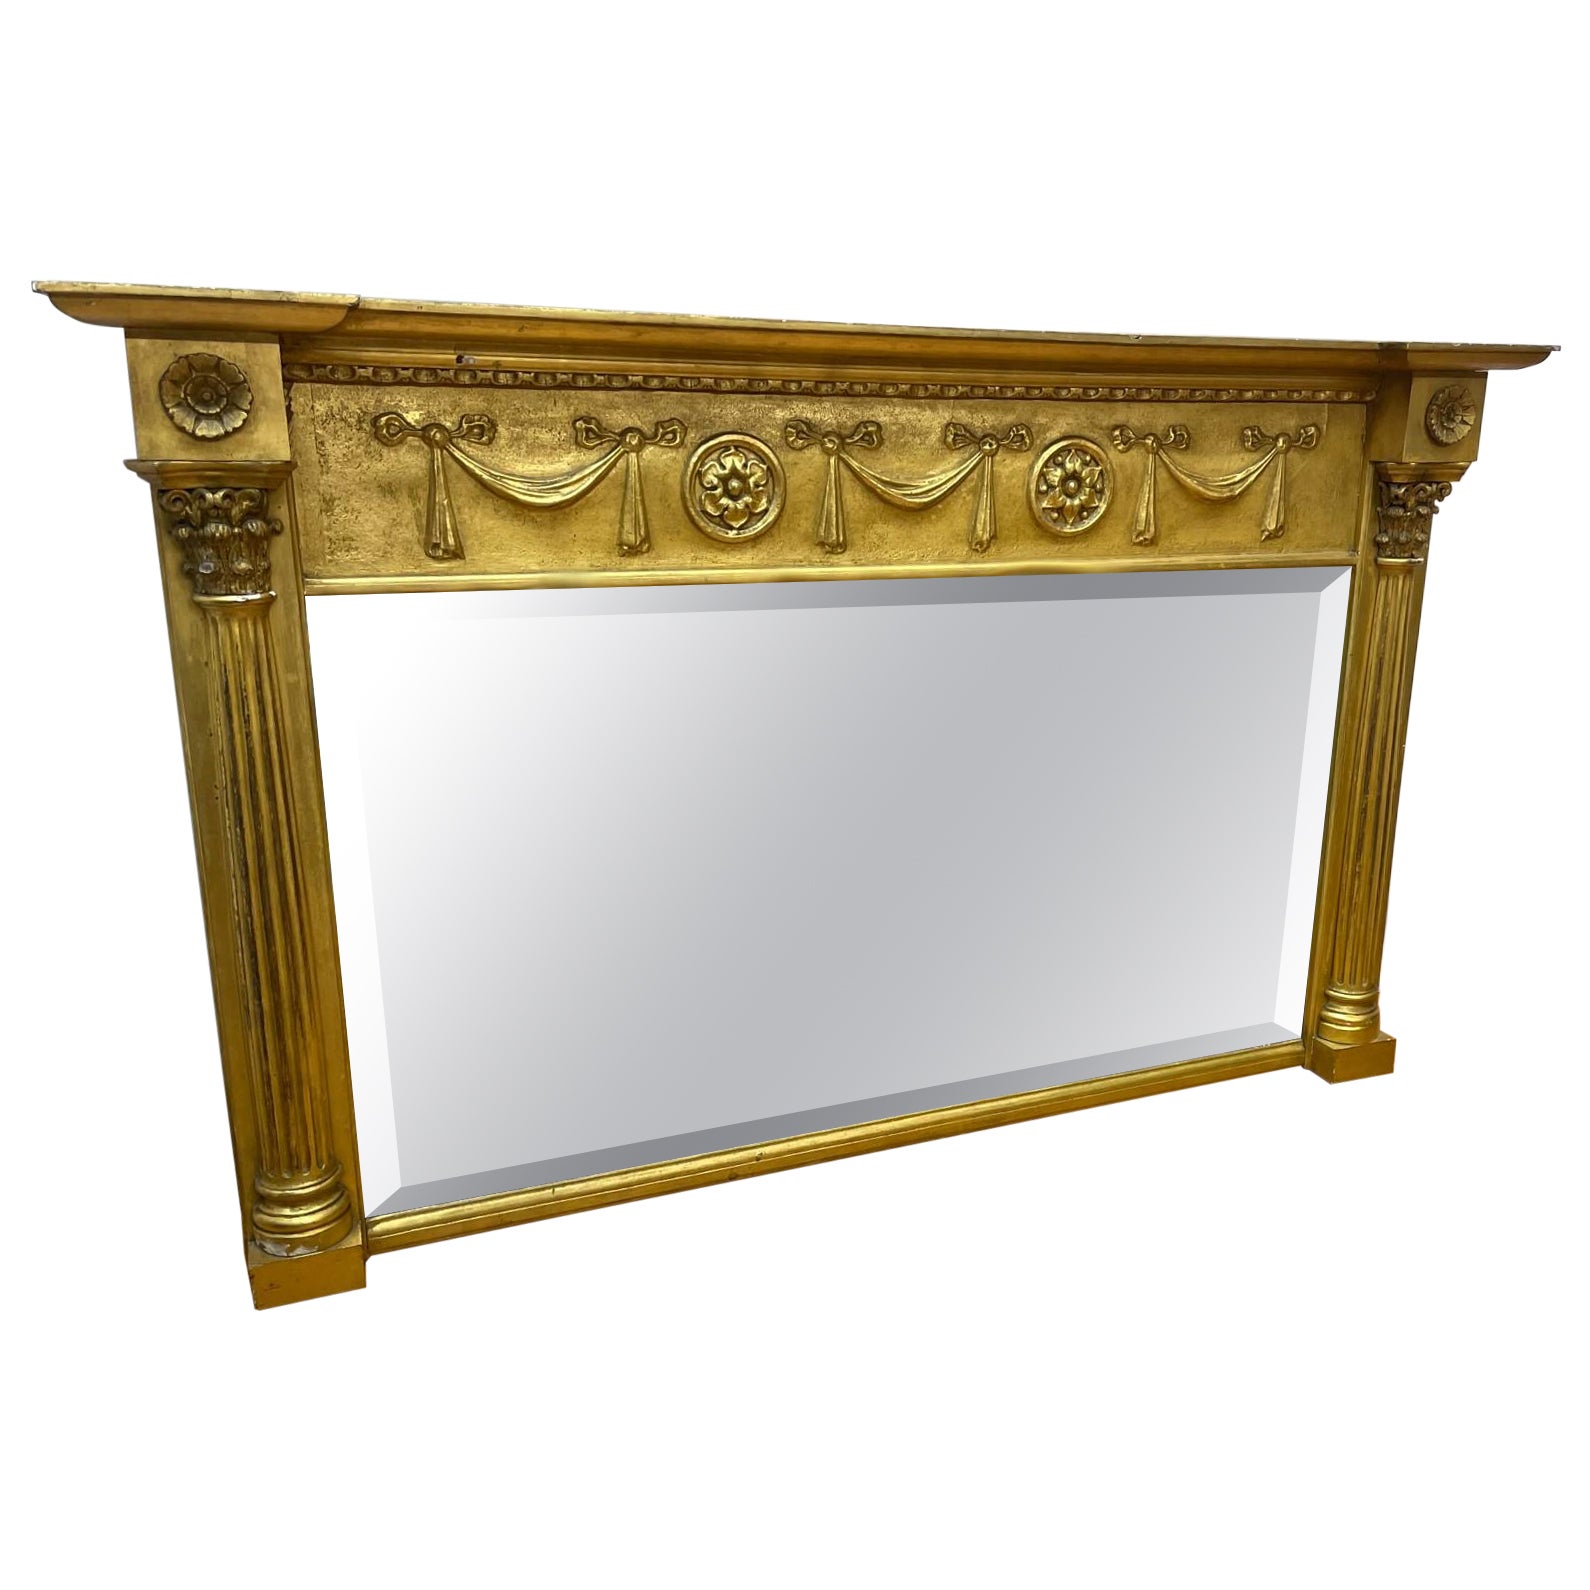 Regency-Style over mantel mirror gilded with ribbon design